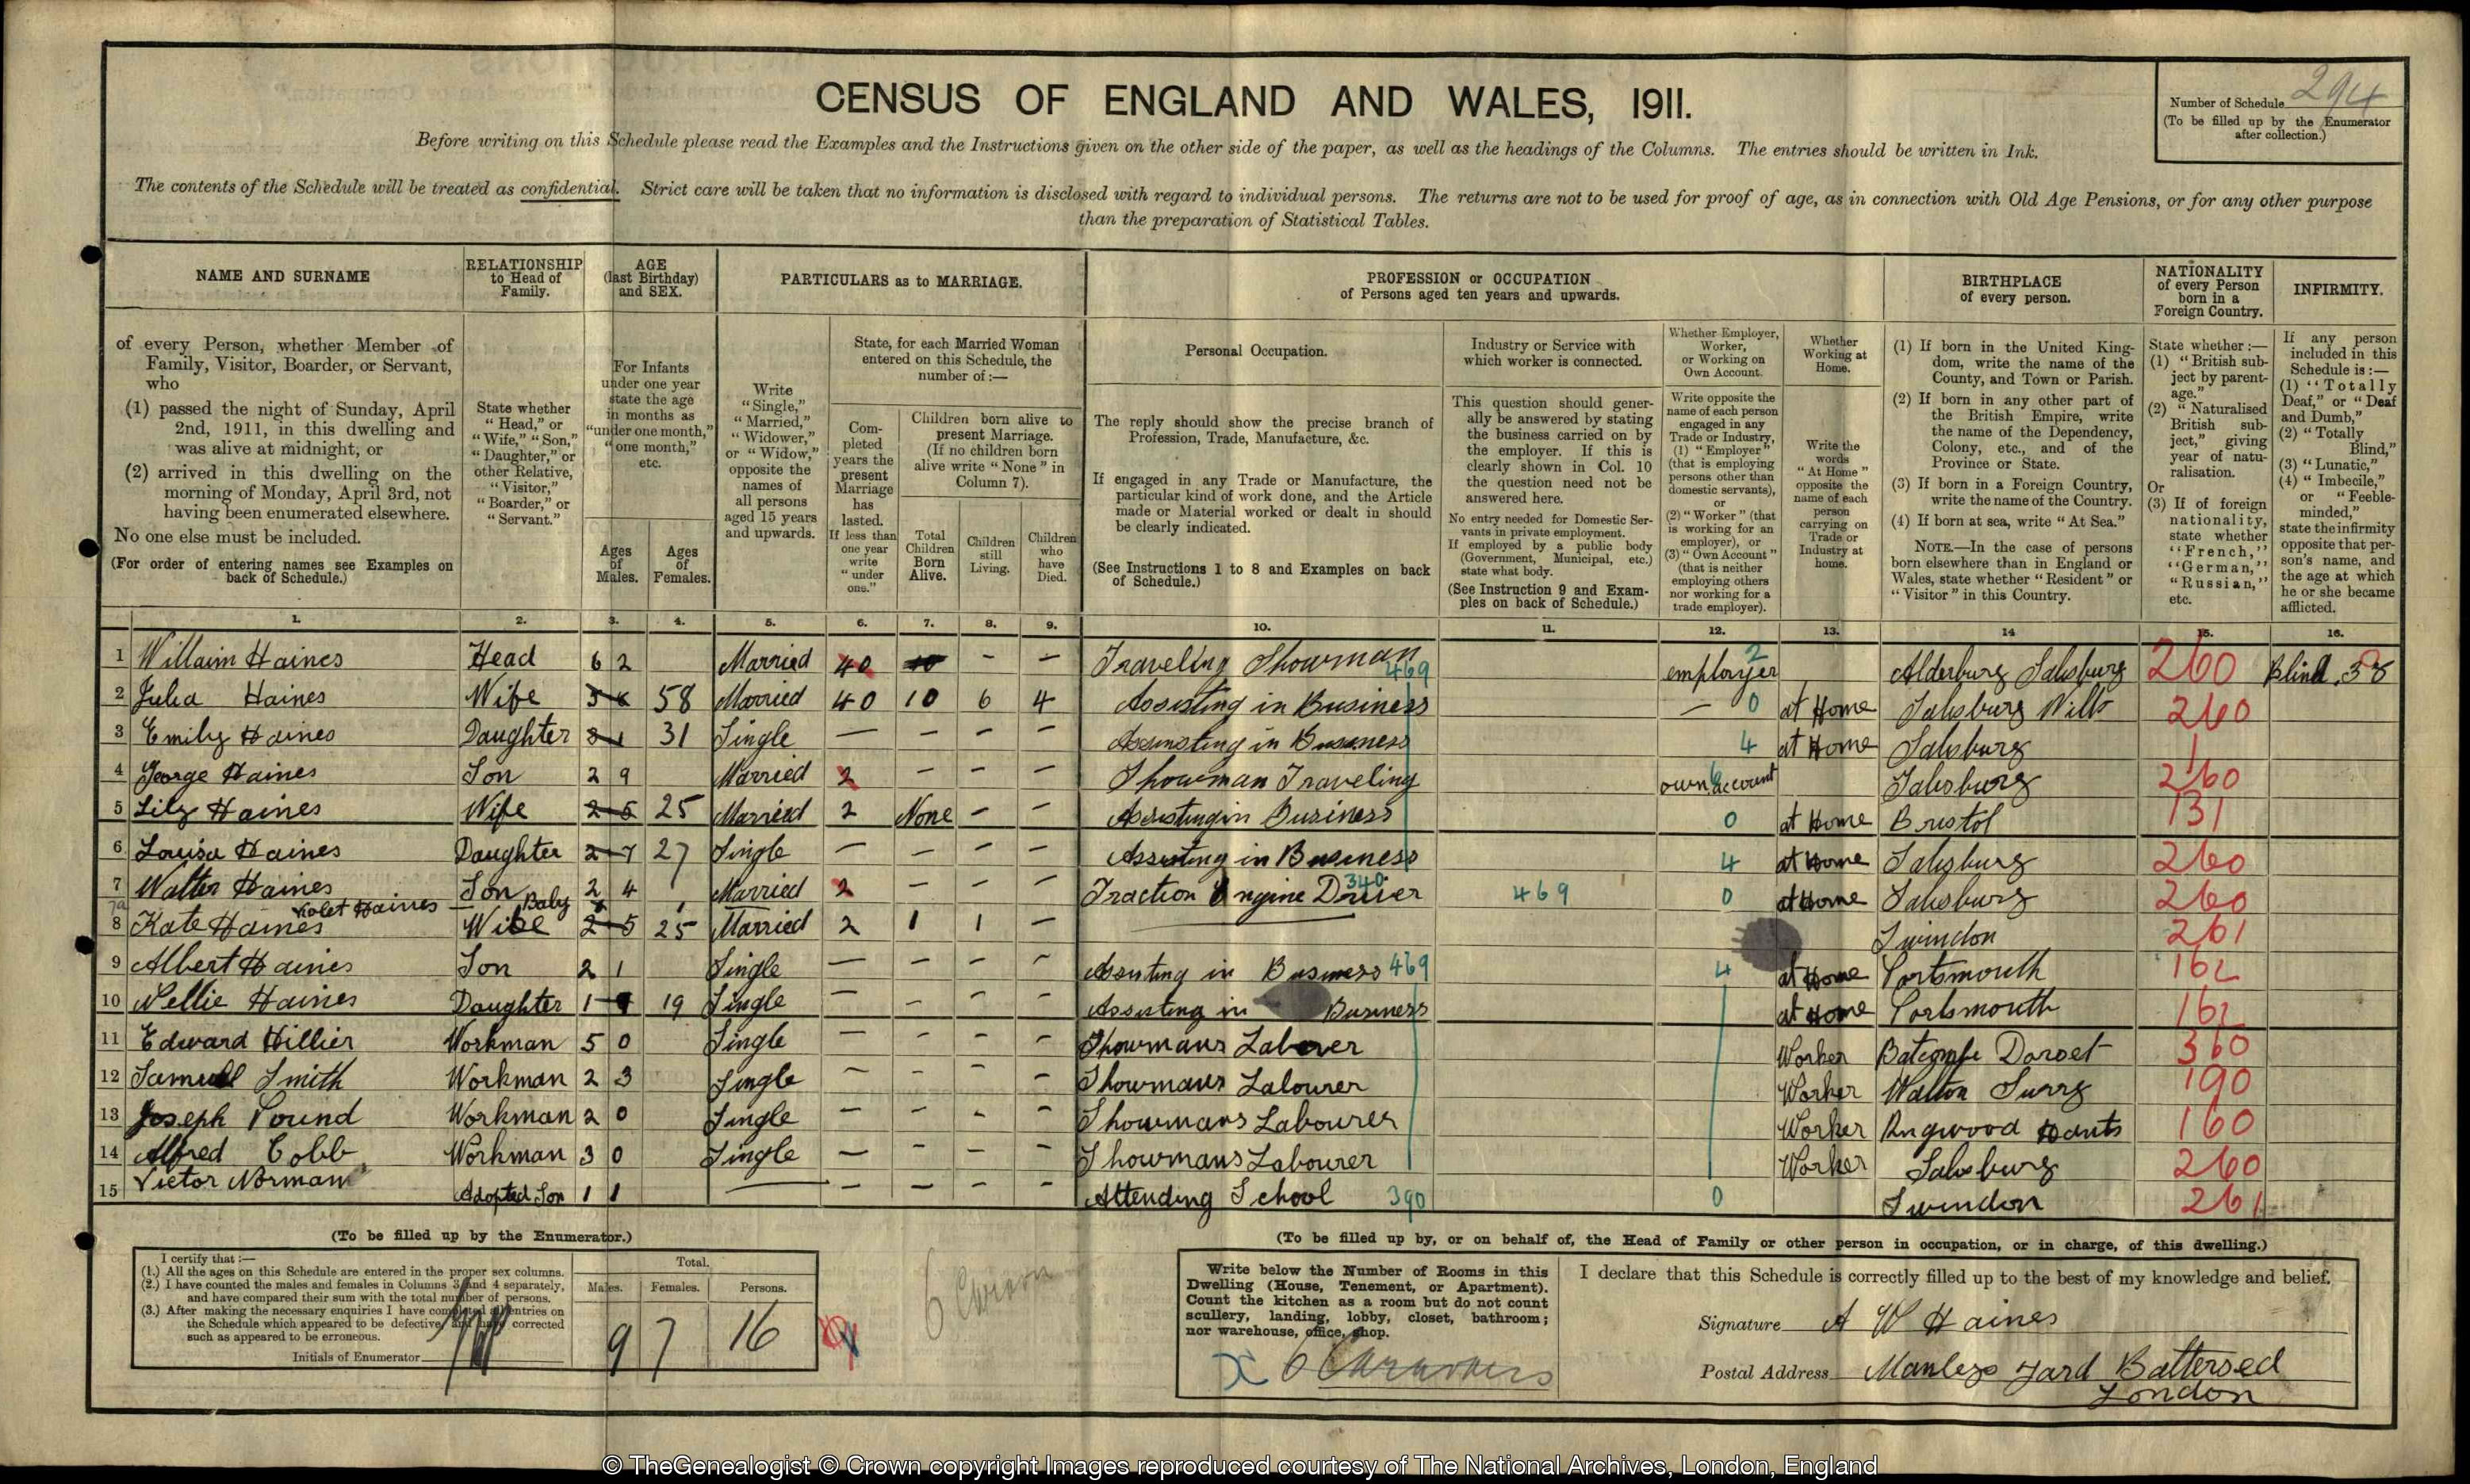 David's ancestors recorded living at Manley's Yard in the 1911 census on TheGenealogist